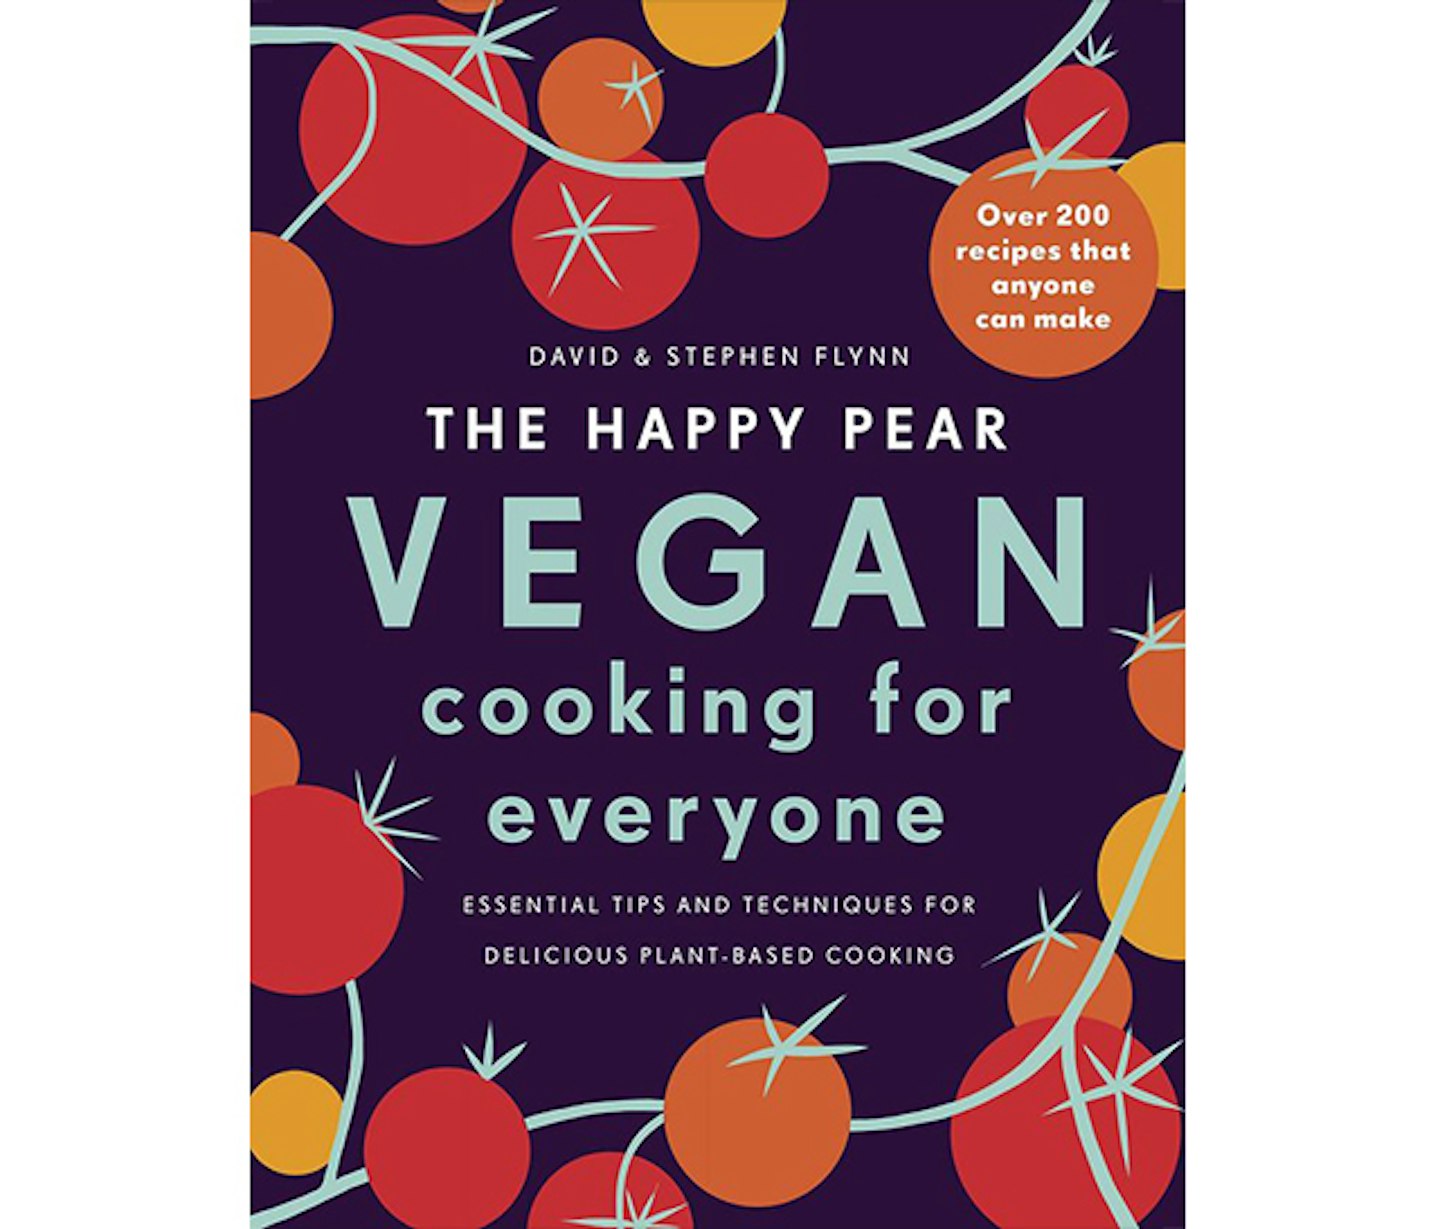 Vegan Cooking for Everyone by The Happy Pear